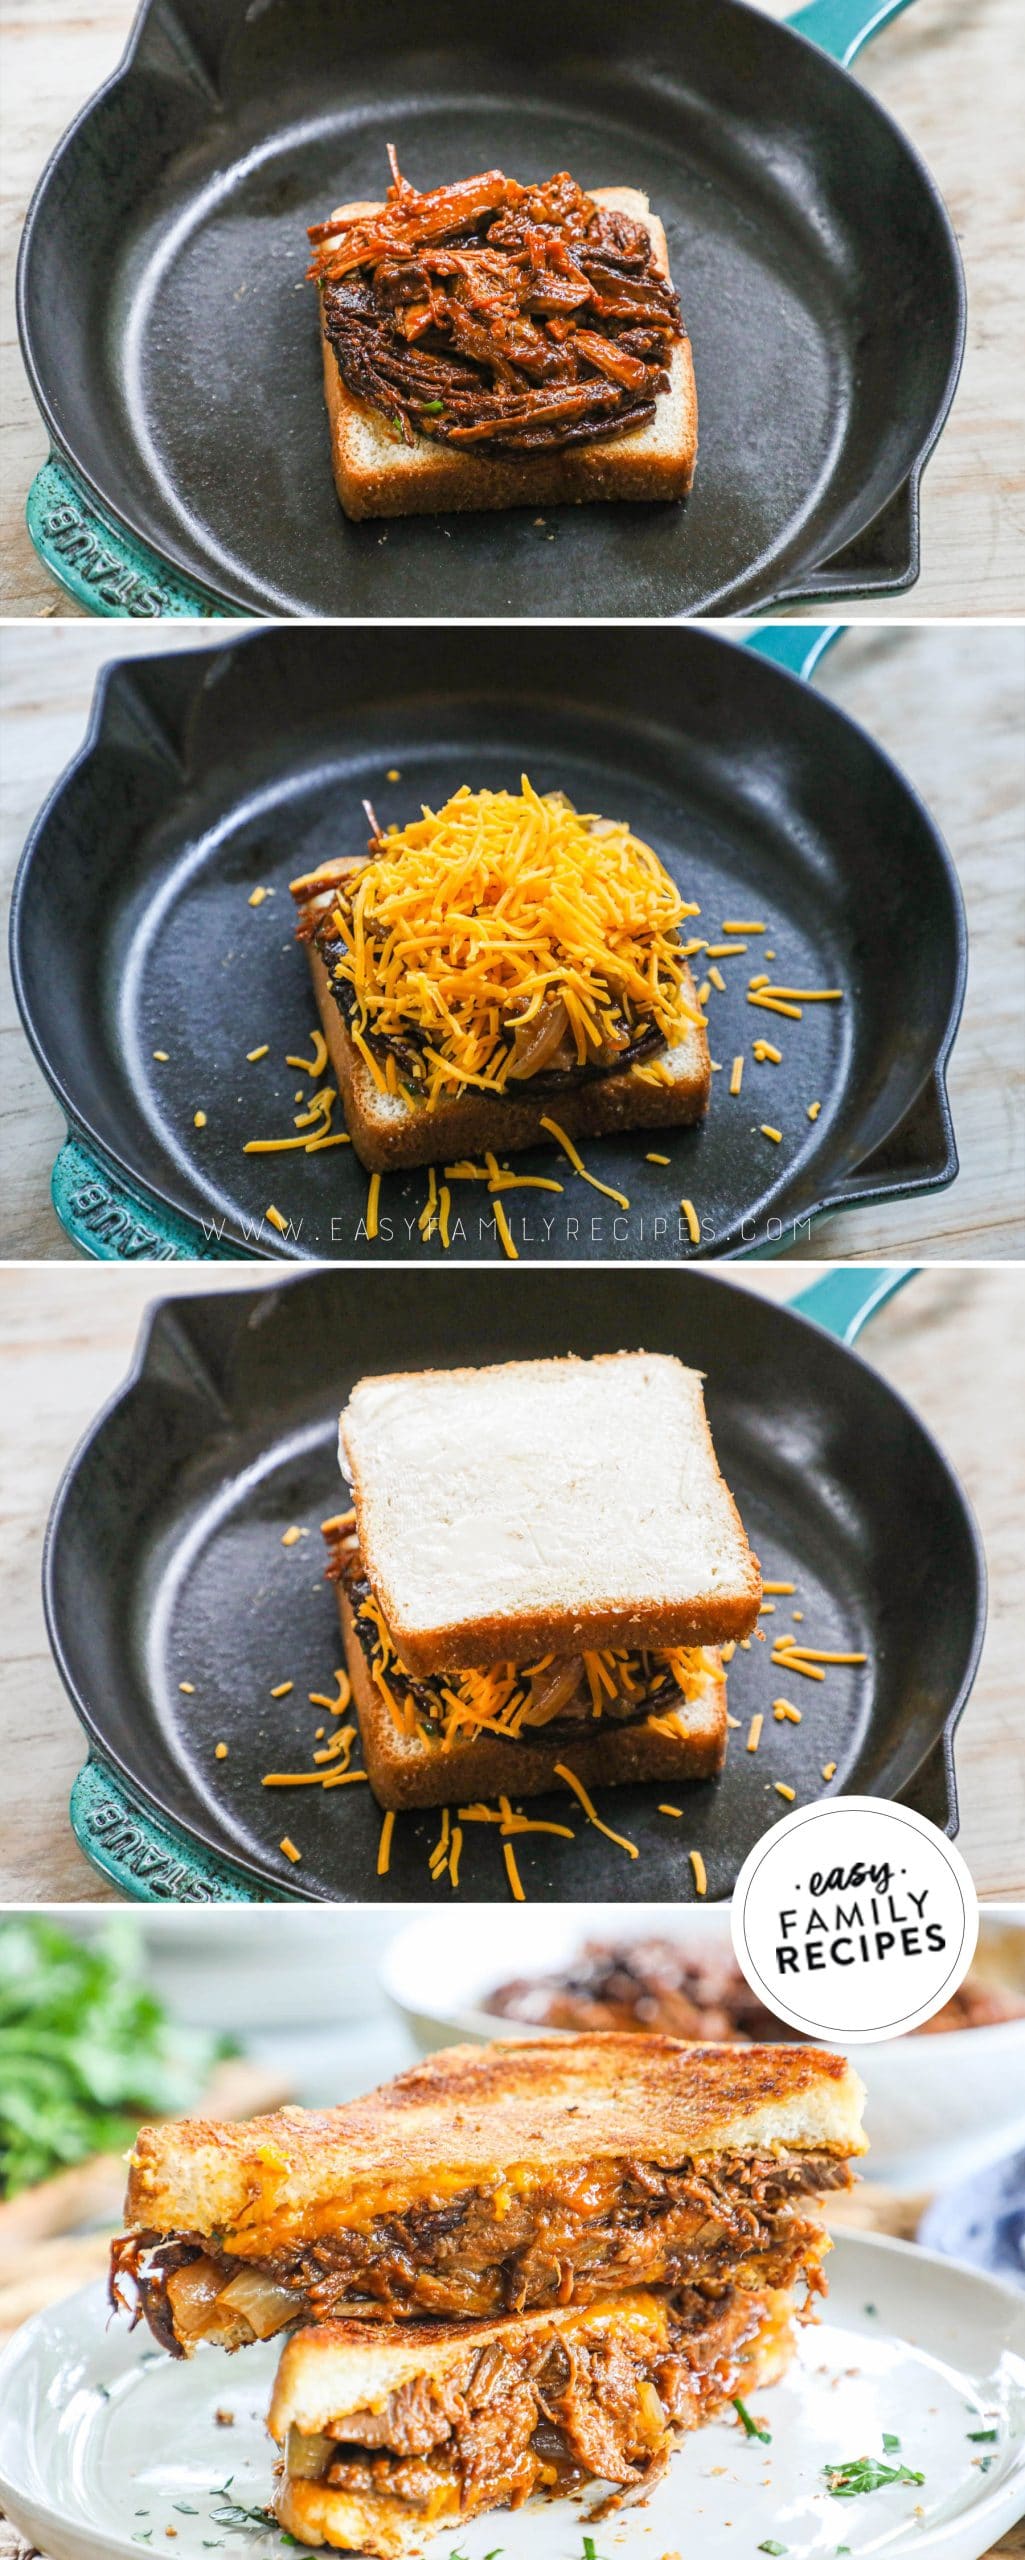 How to make brisket grilled cheese sandwich- 1. Butter skillet. 2. Add cheese, caramelized onions, and beef brisket to texas toast, 3. Top with buttered bread 4. grill on each side until golden.